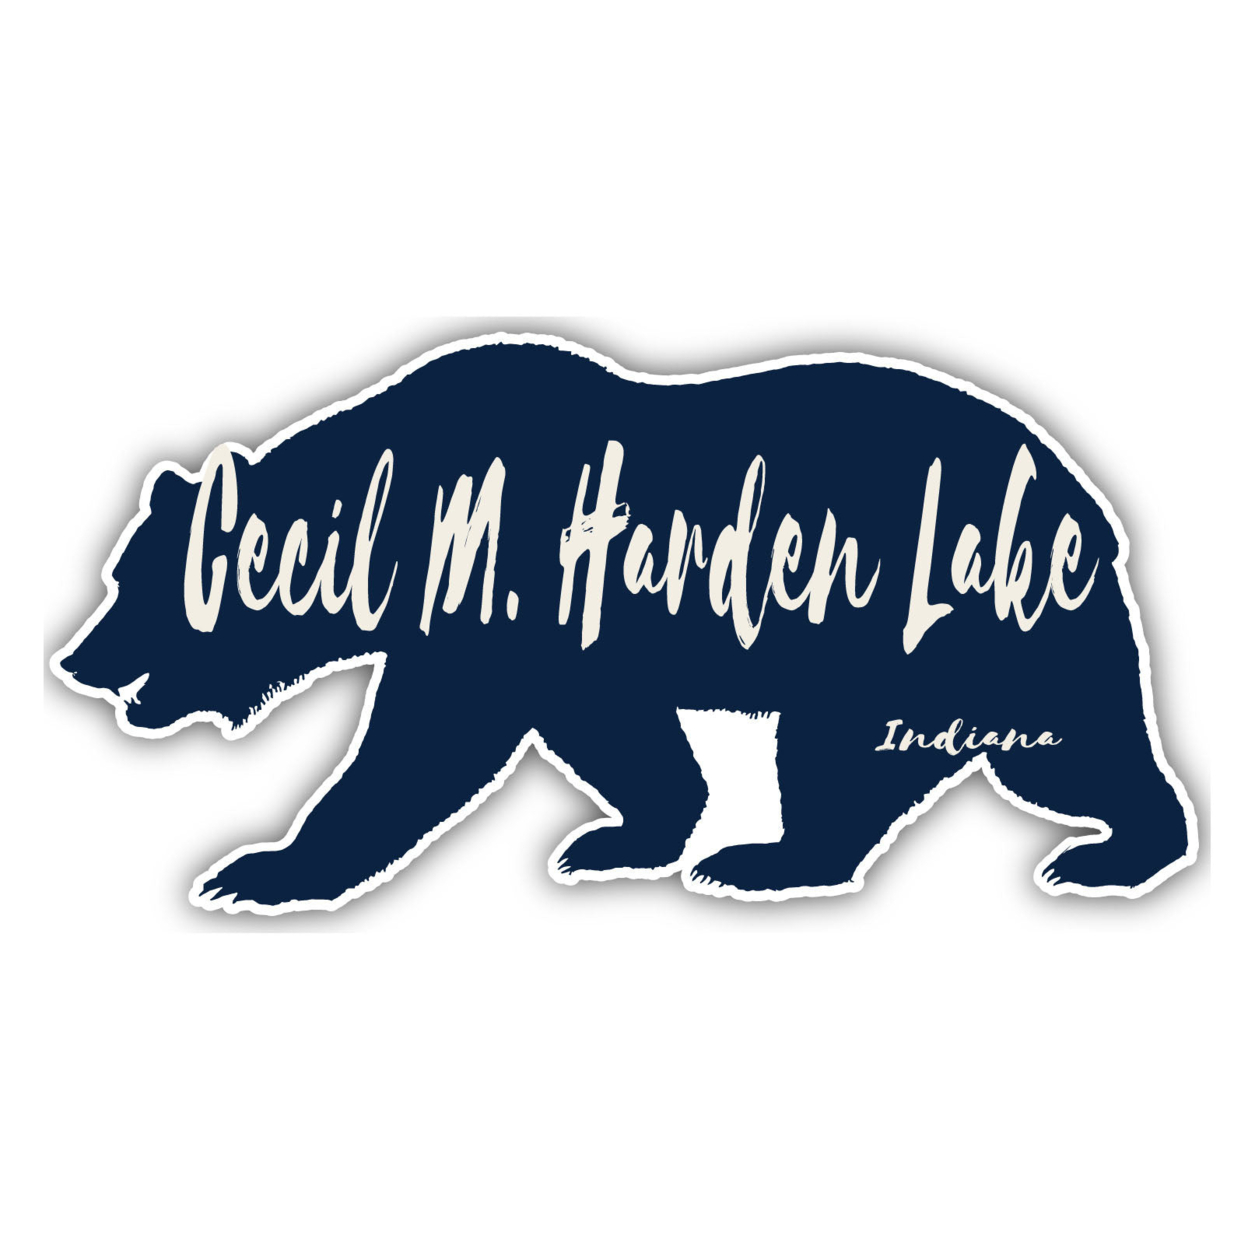 Cecil M. Harden Lake Indiana Souvenir Decorative Stickers (Choose Theme And Size) - 4-Pack, 12-Inch, Bear